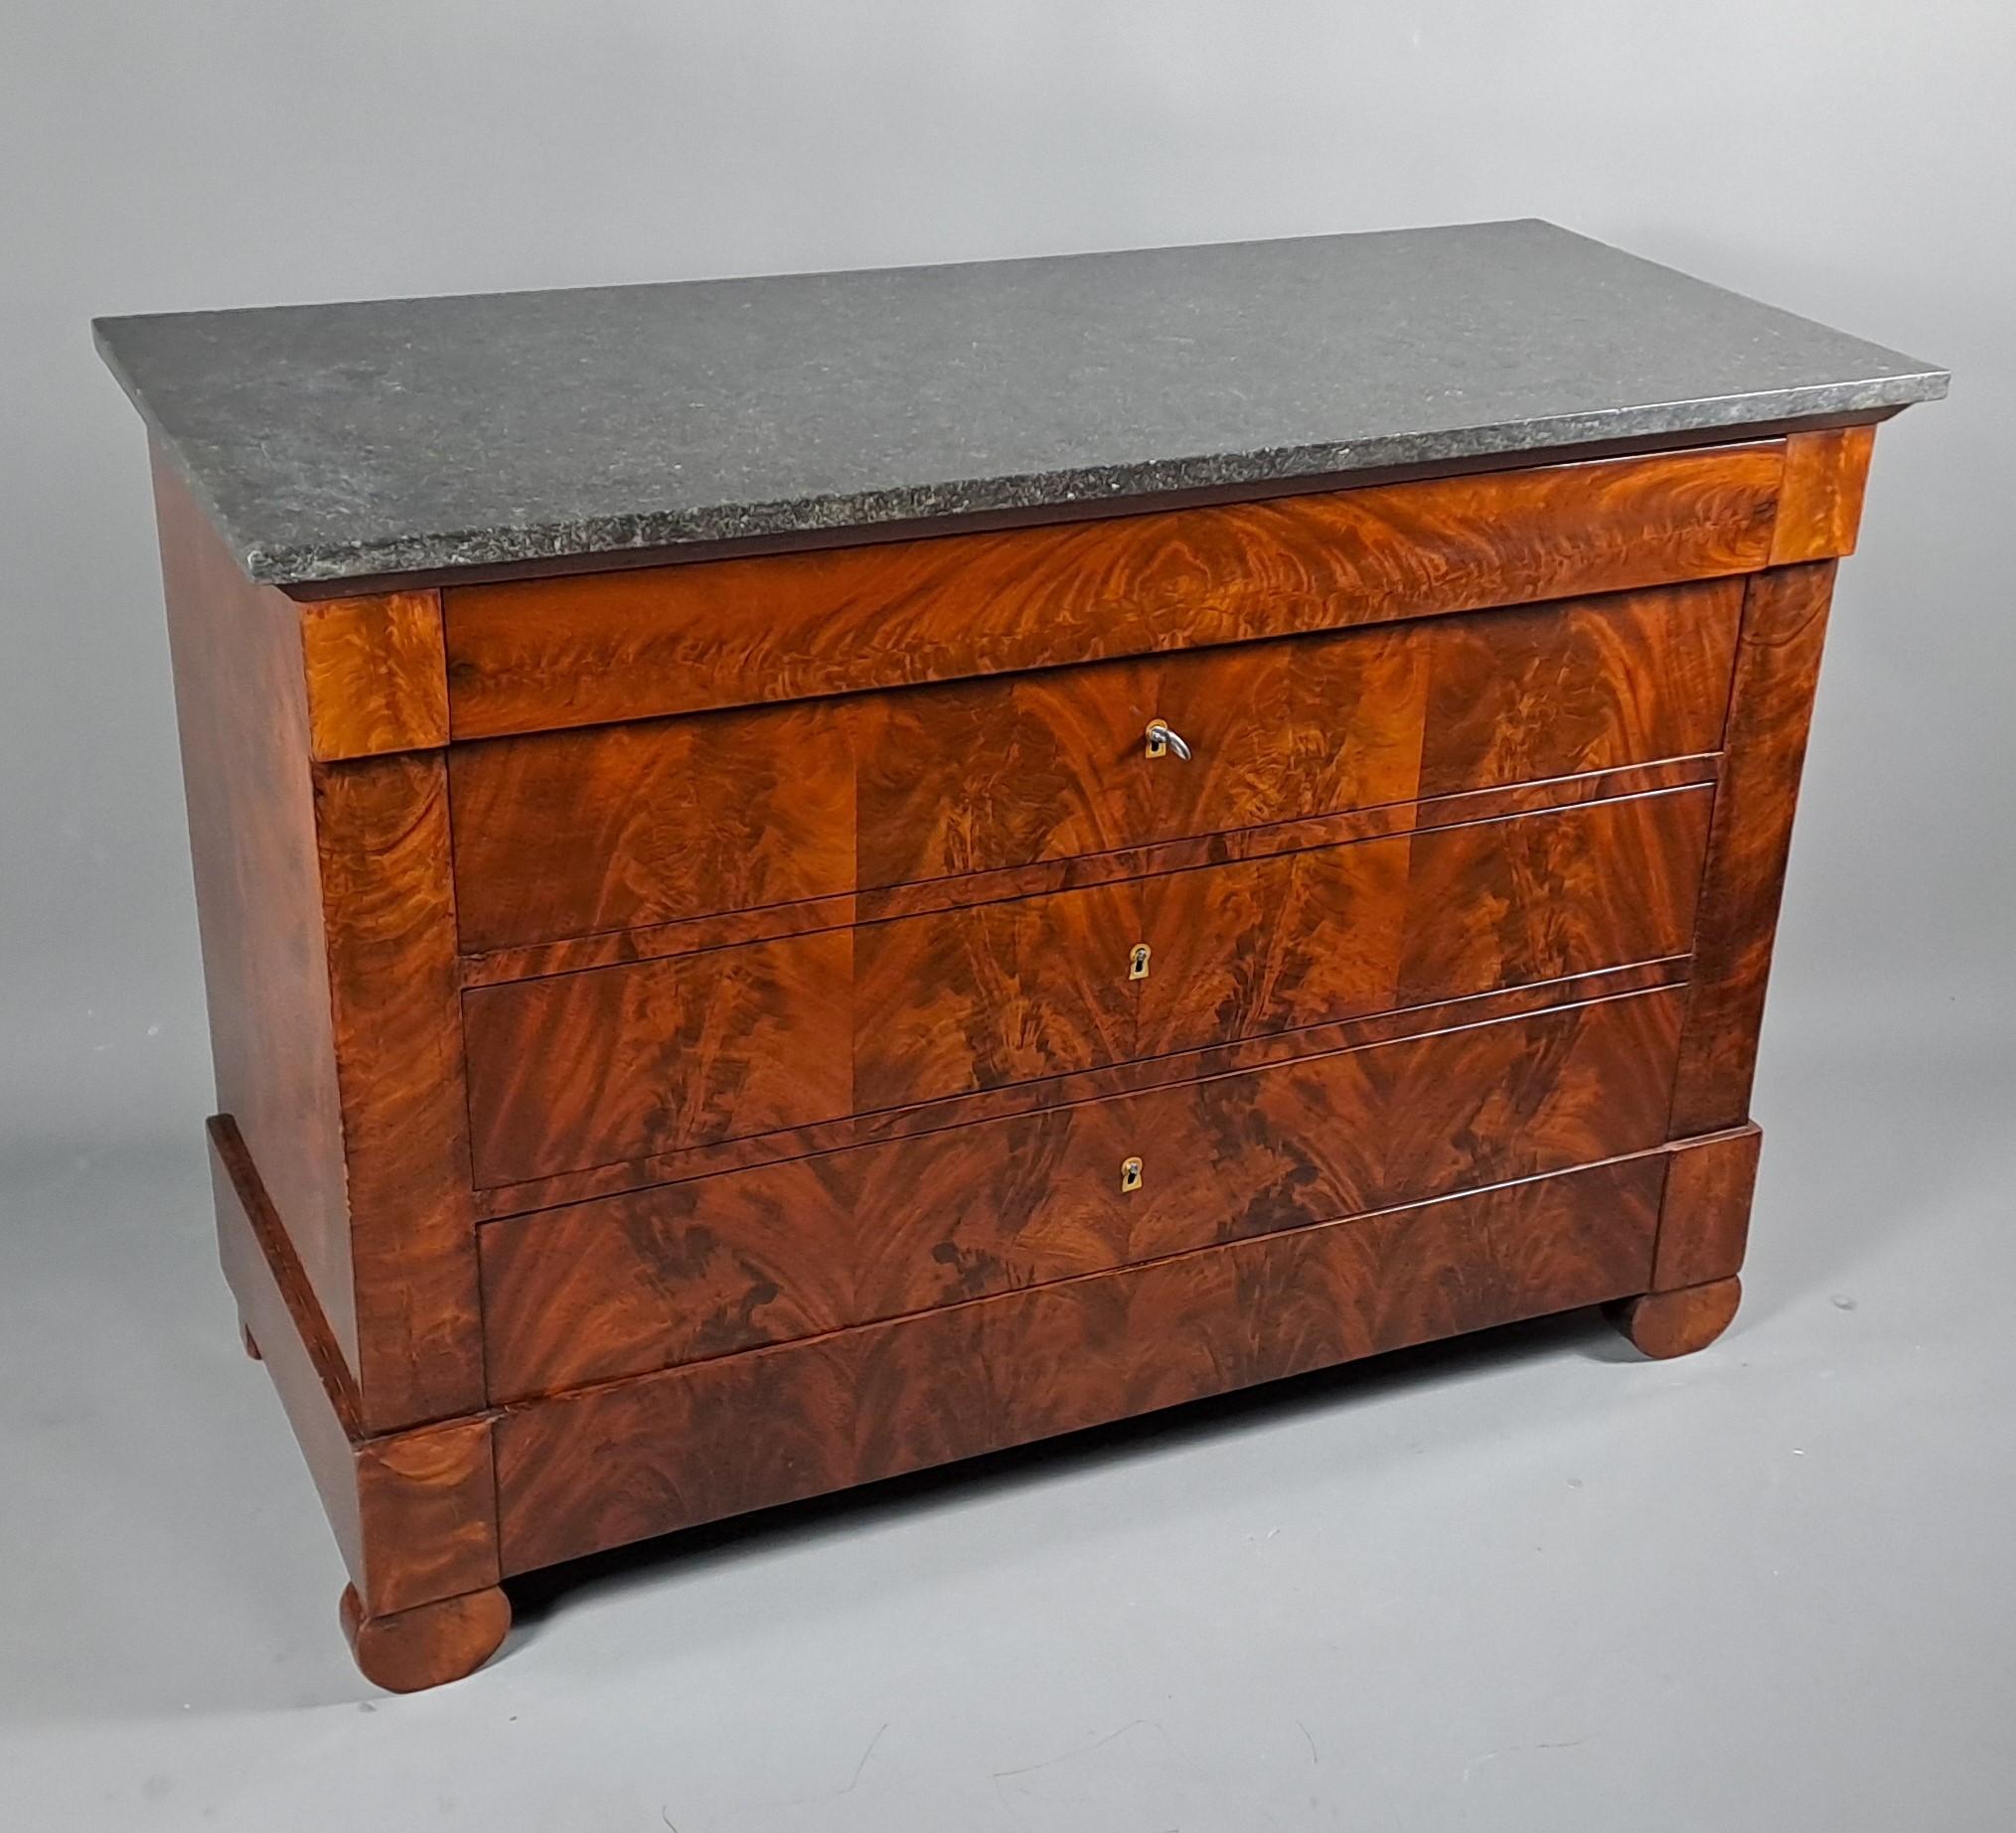 Sublime Restauration Period chest of drawers in flamed mahogany on all sides, topped with black granite marble.

Opening four drawers.

Exceptional facade treated in symmetrical double flame.

Built in solid oak Parisian work around 1820/1830, bears